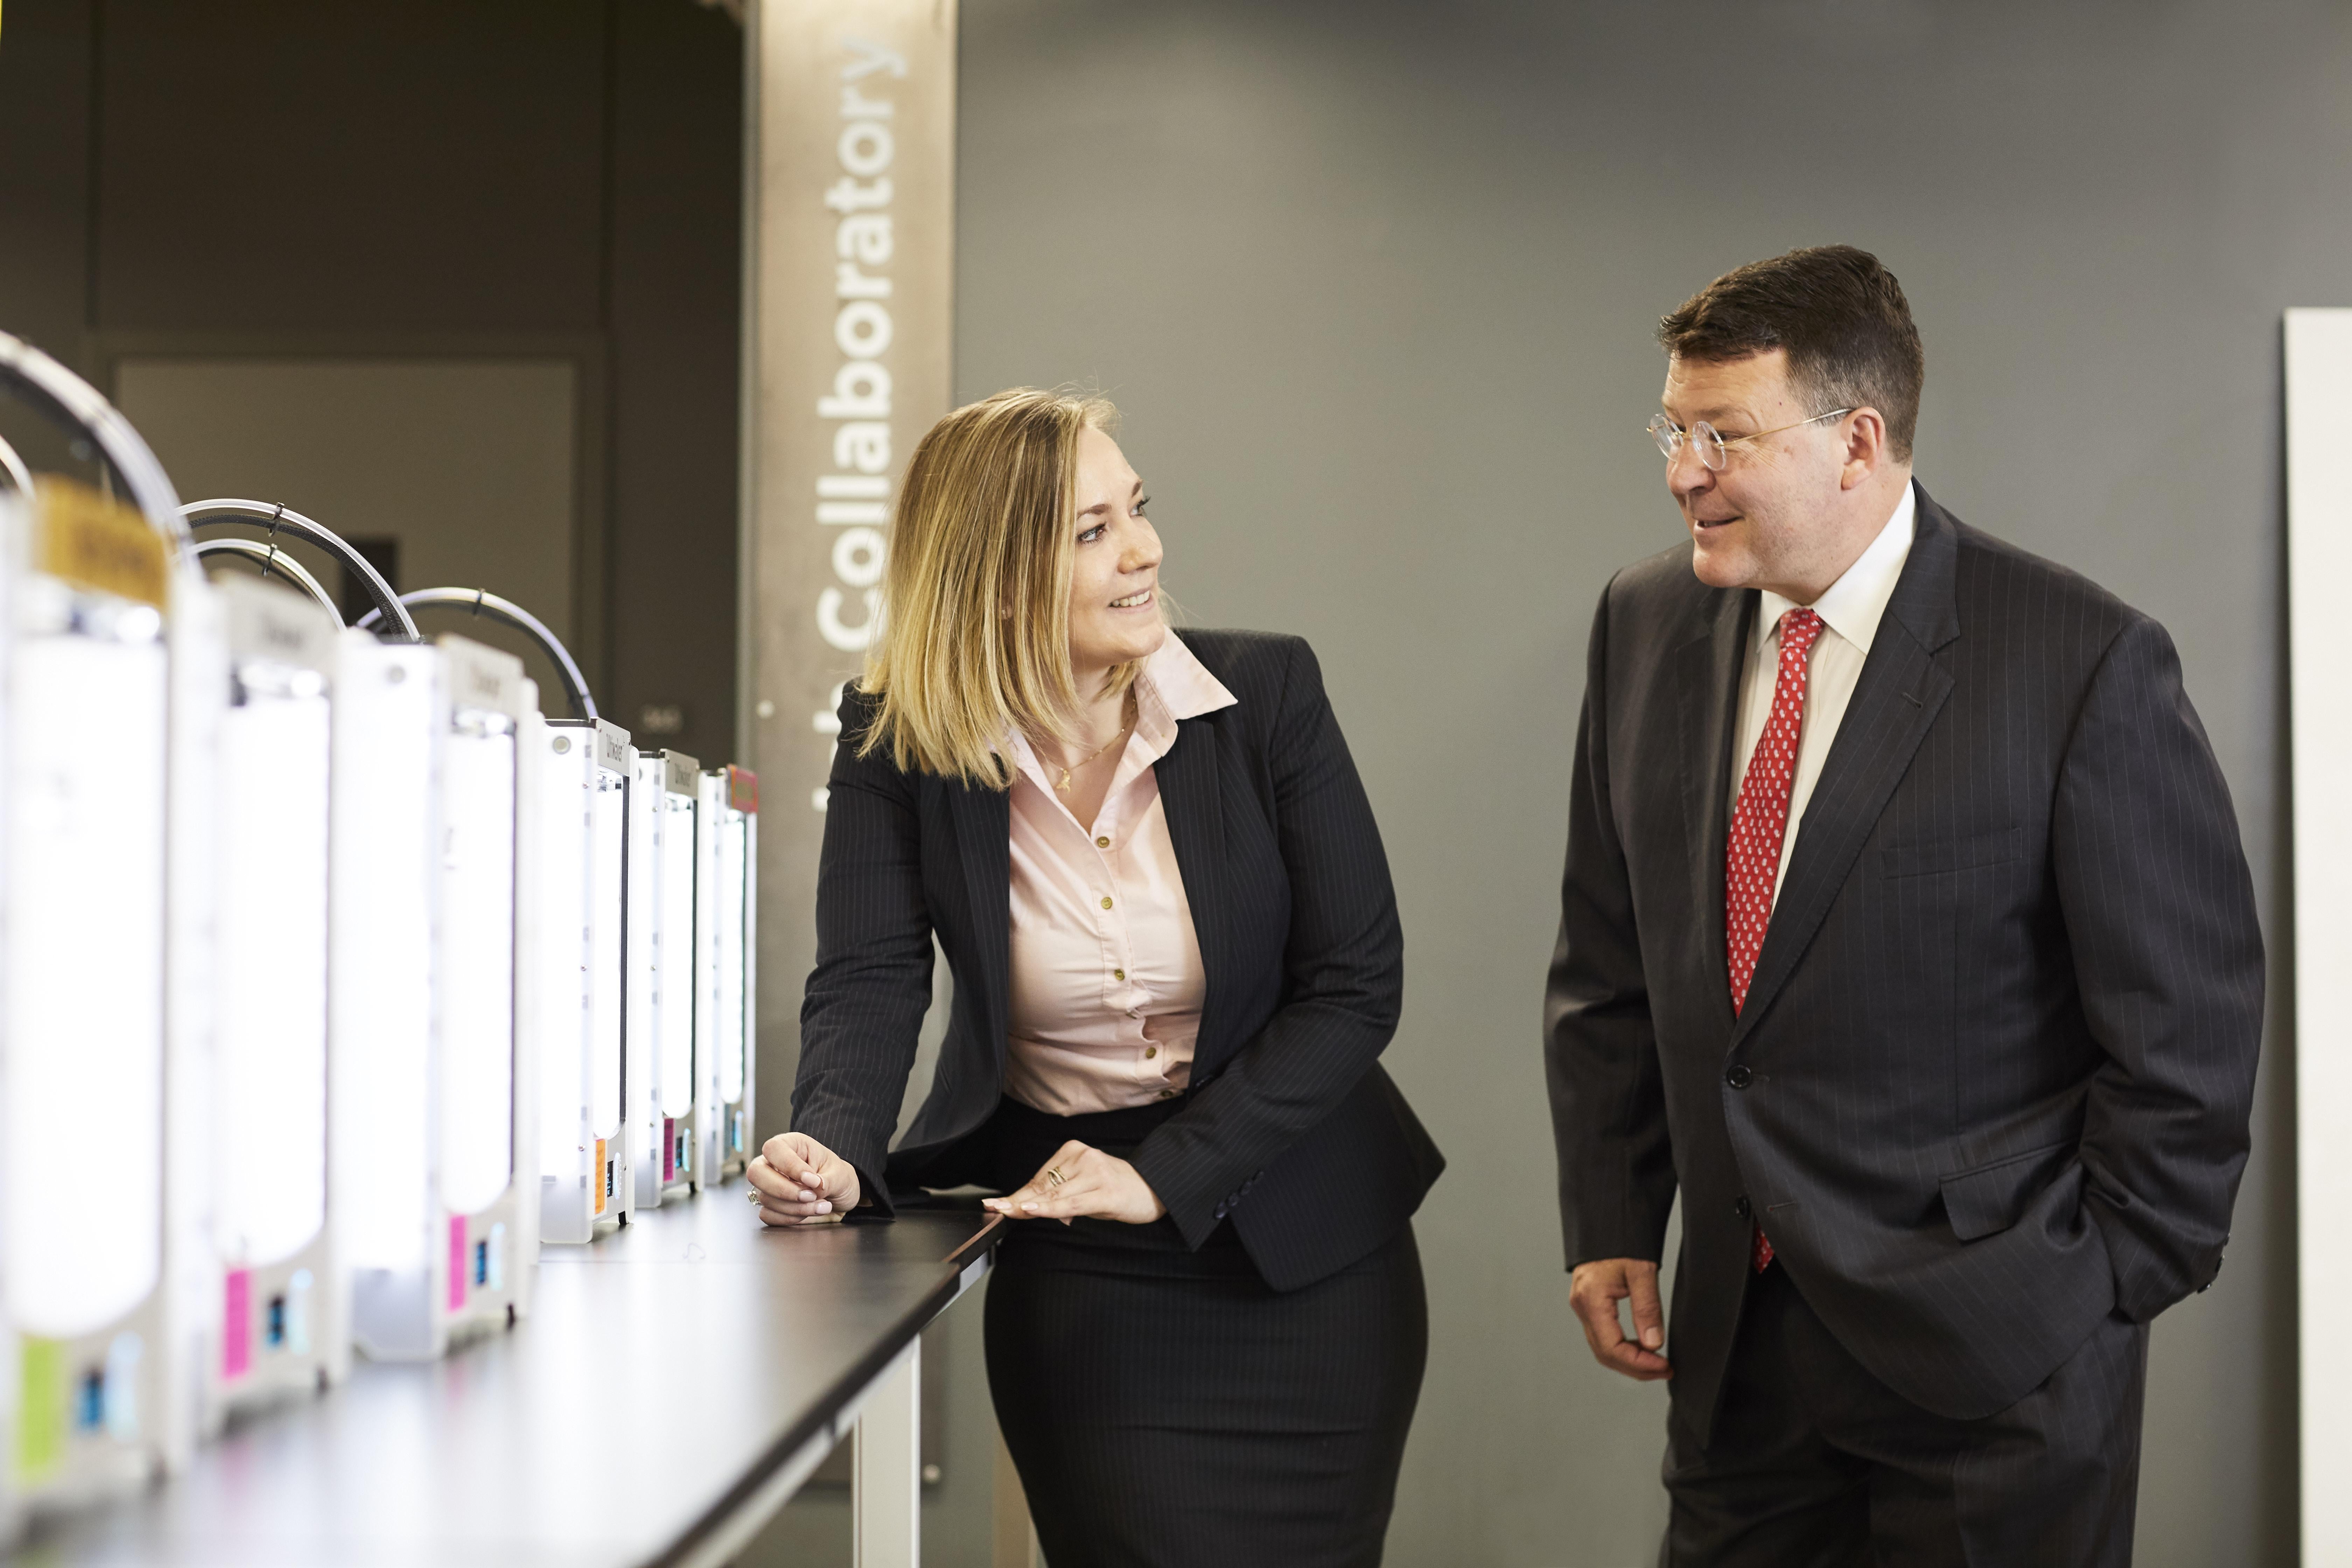 Student Rebecca Lindhorst and Professor Ted Theofrastous speak near a set of 3D printers.